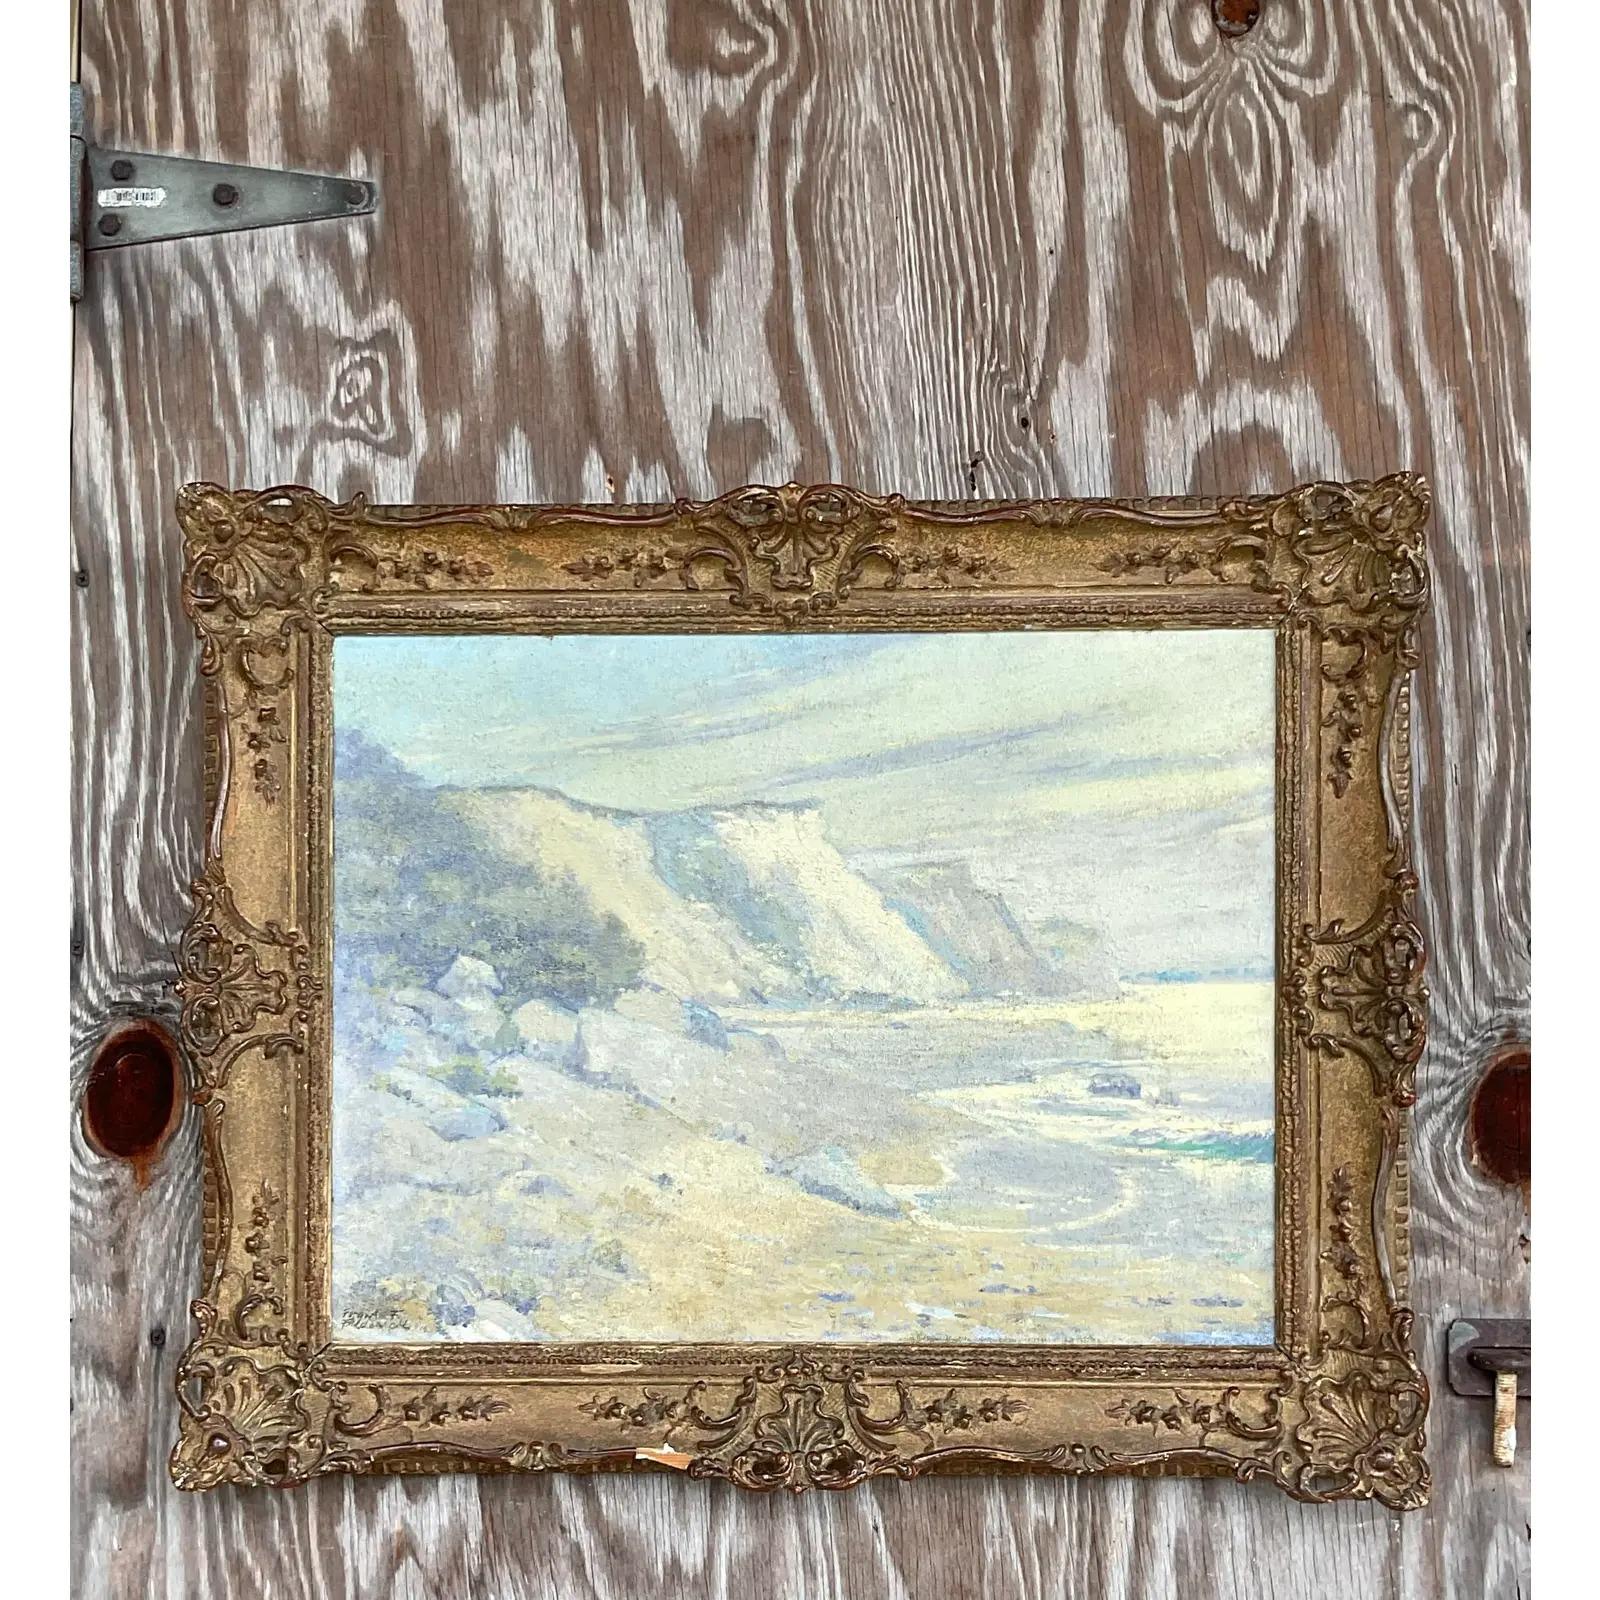 Incredible vintage original oil painting. A gorgeous landscape in soft colors. Beautiful vintage distressed frame. Acquired from a Palm Beach estate.